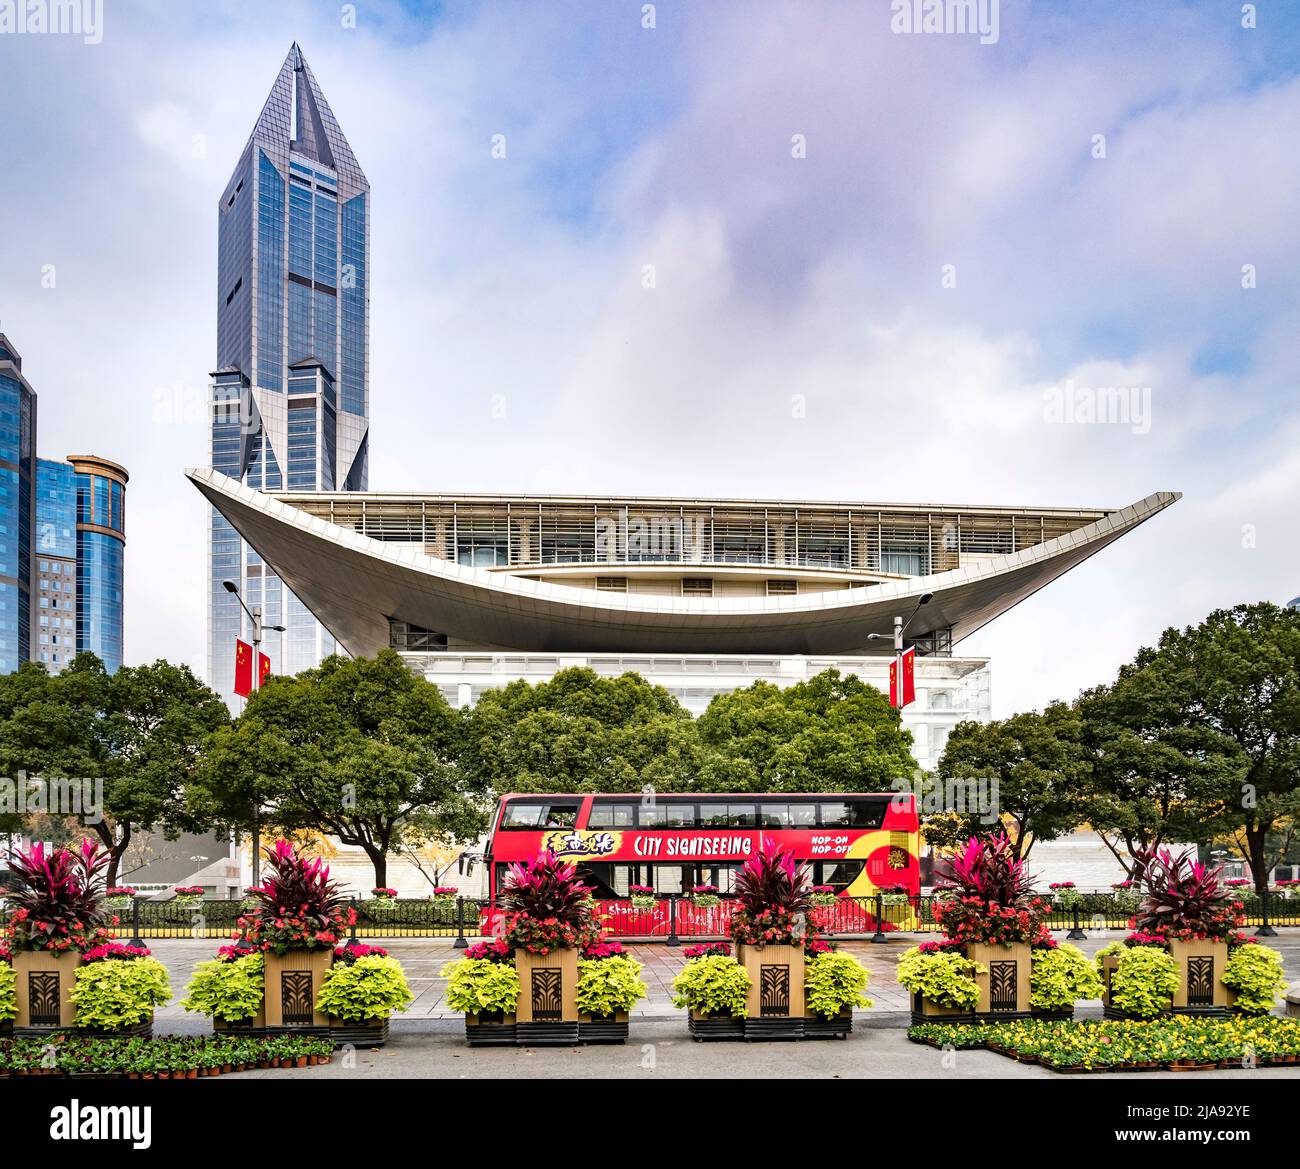 2 December 2018: Shanghai, China - The Shanghai Urban Planning Exhibition Center from People's Square, with a sightseeing bus in front. Stock Photo